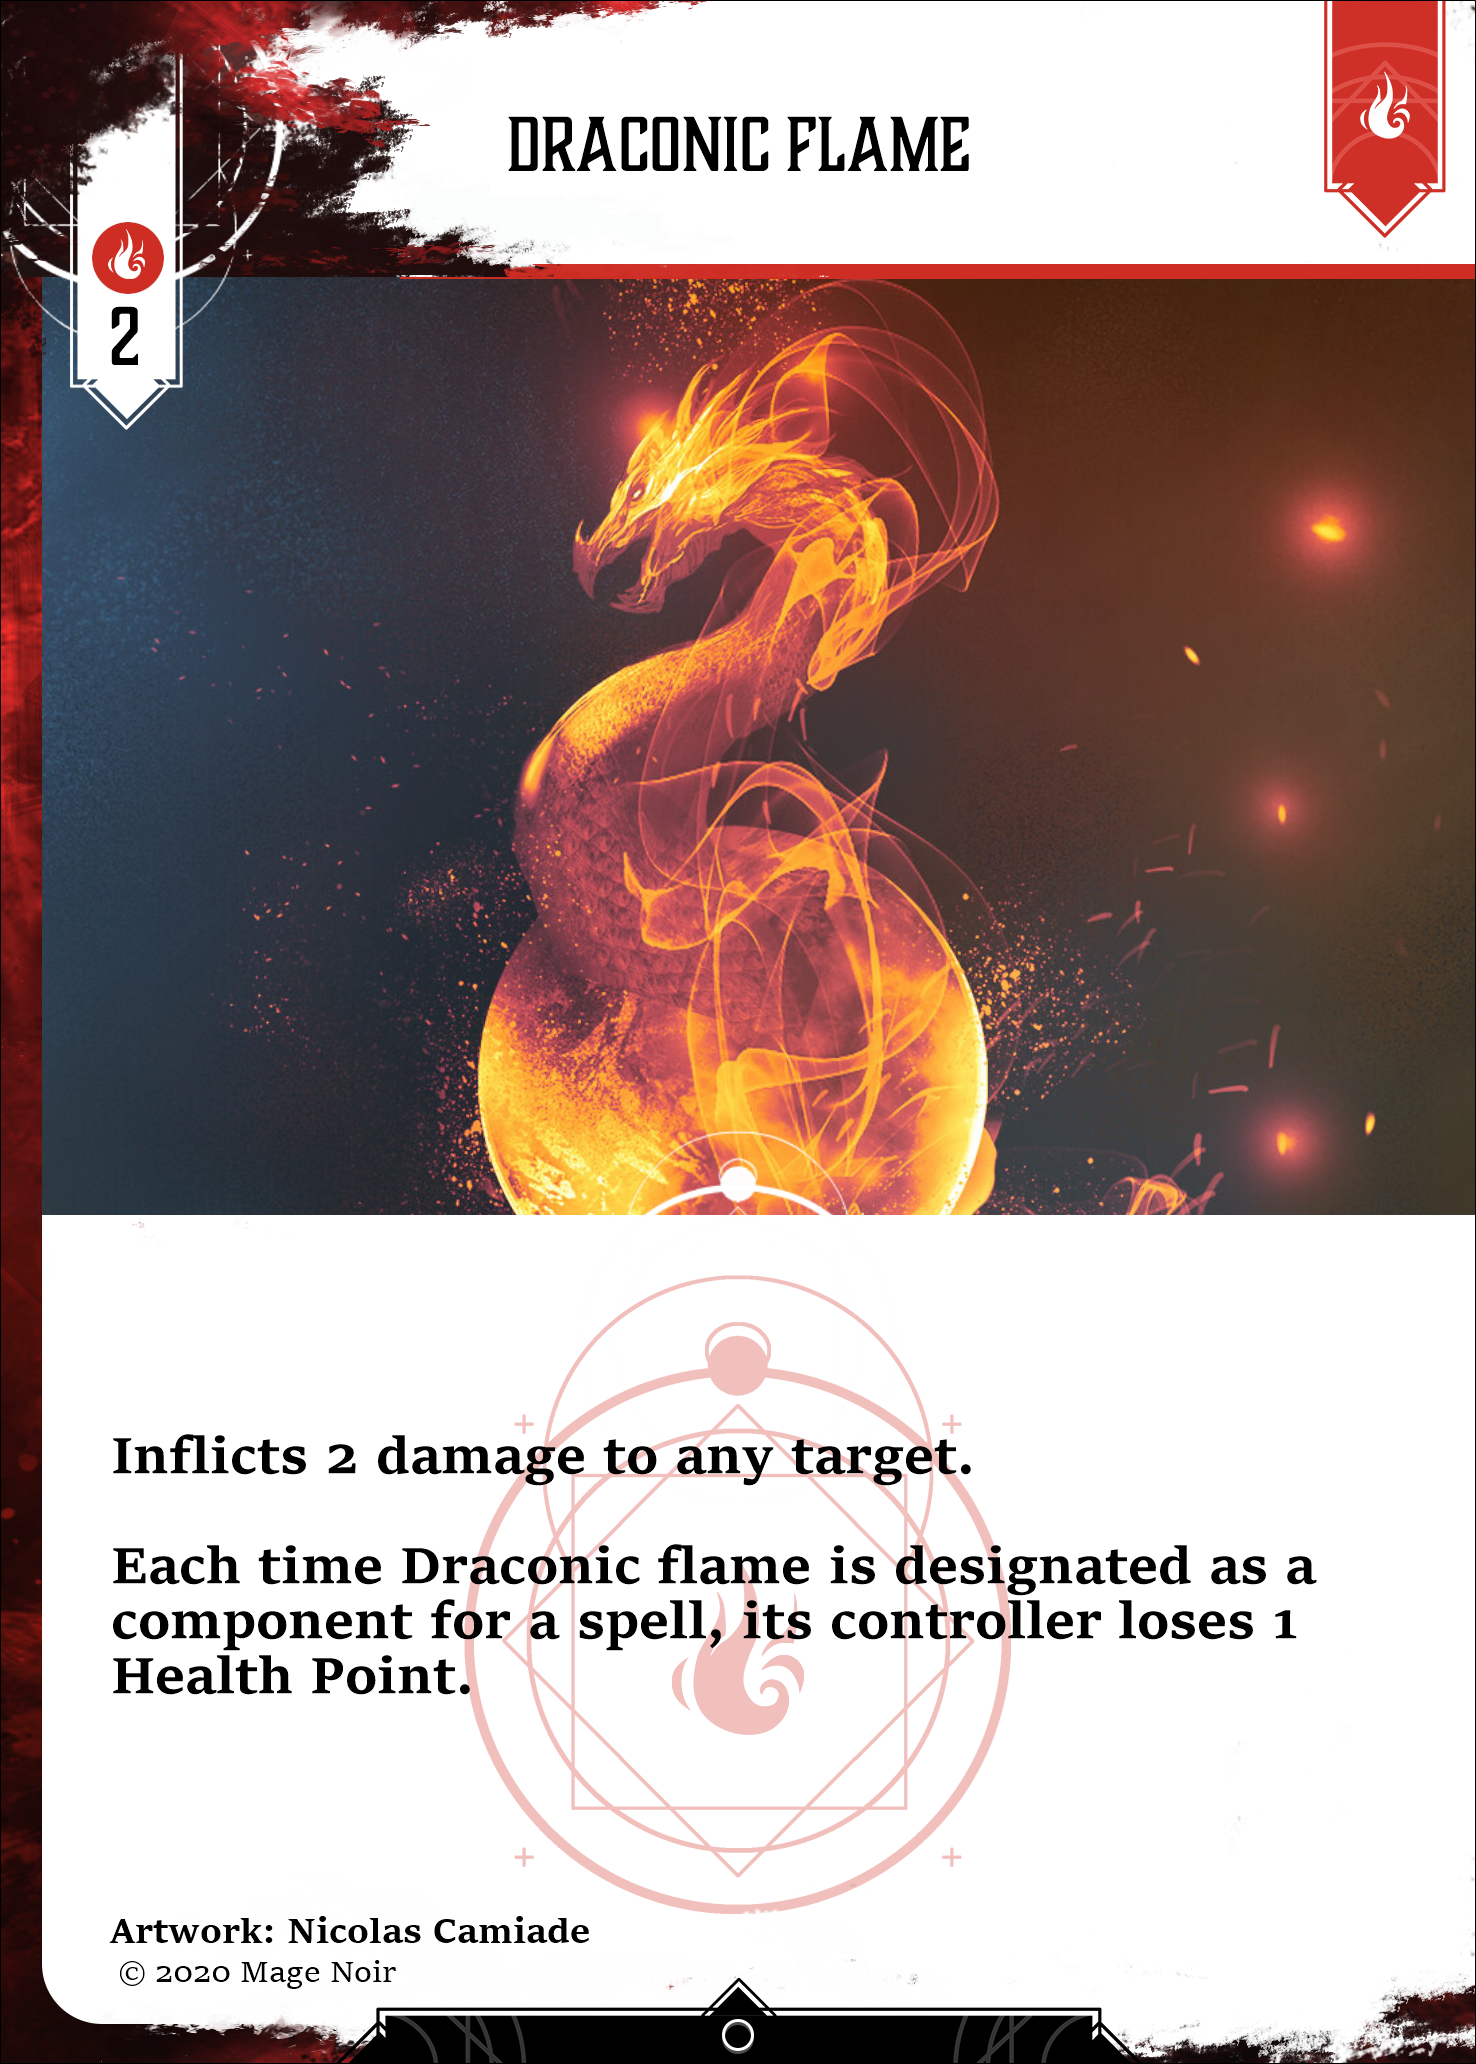 Draconic flame card